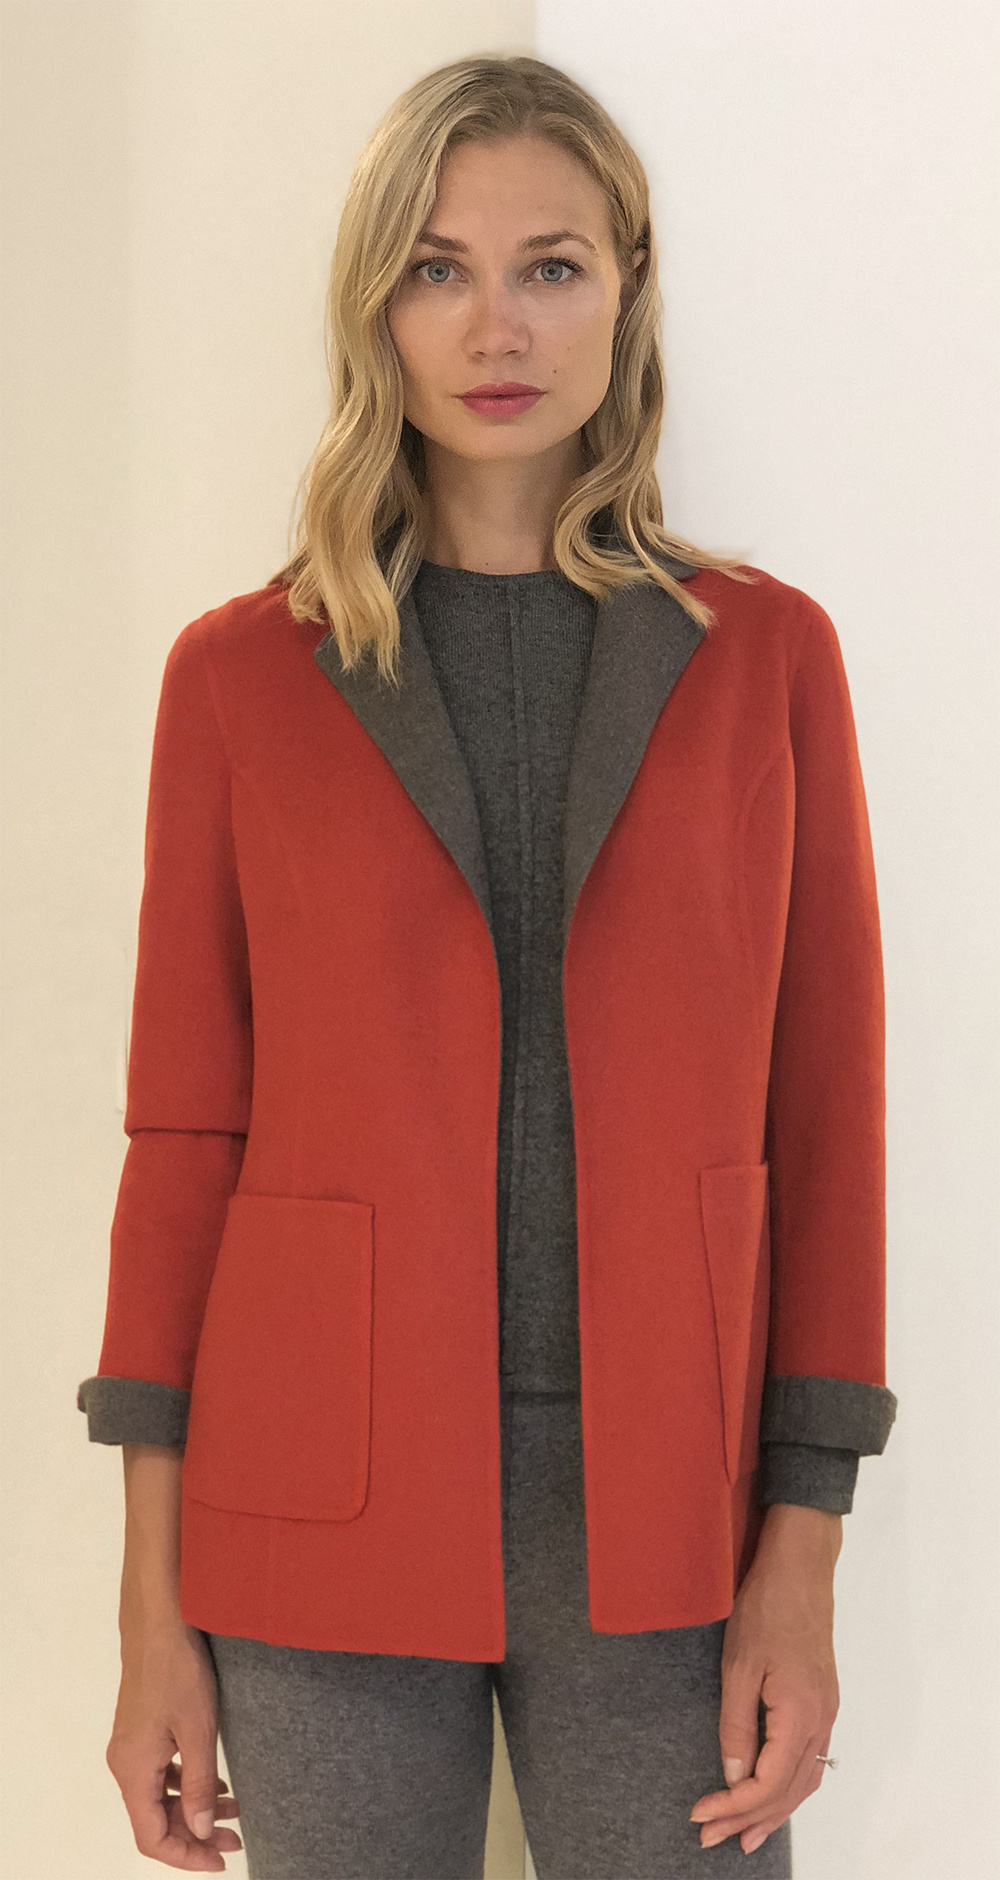 CASHMERE DOUBLE FACE REVERSIBLE JACKET: RED-ANTHRACITE - RANI ARABELLA